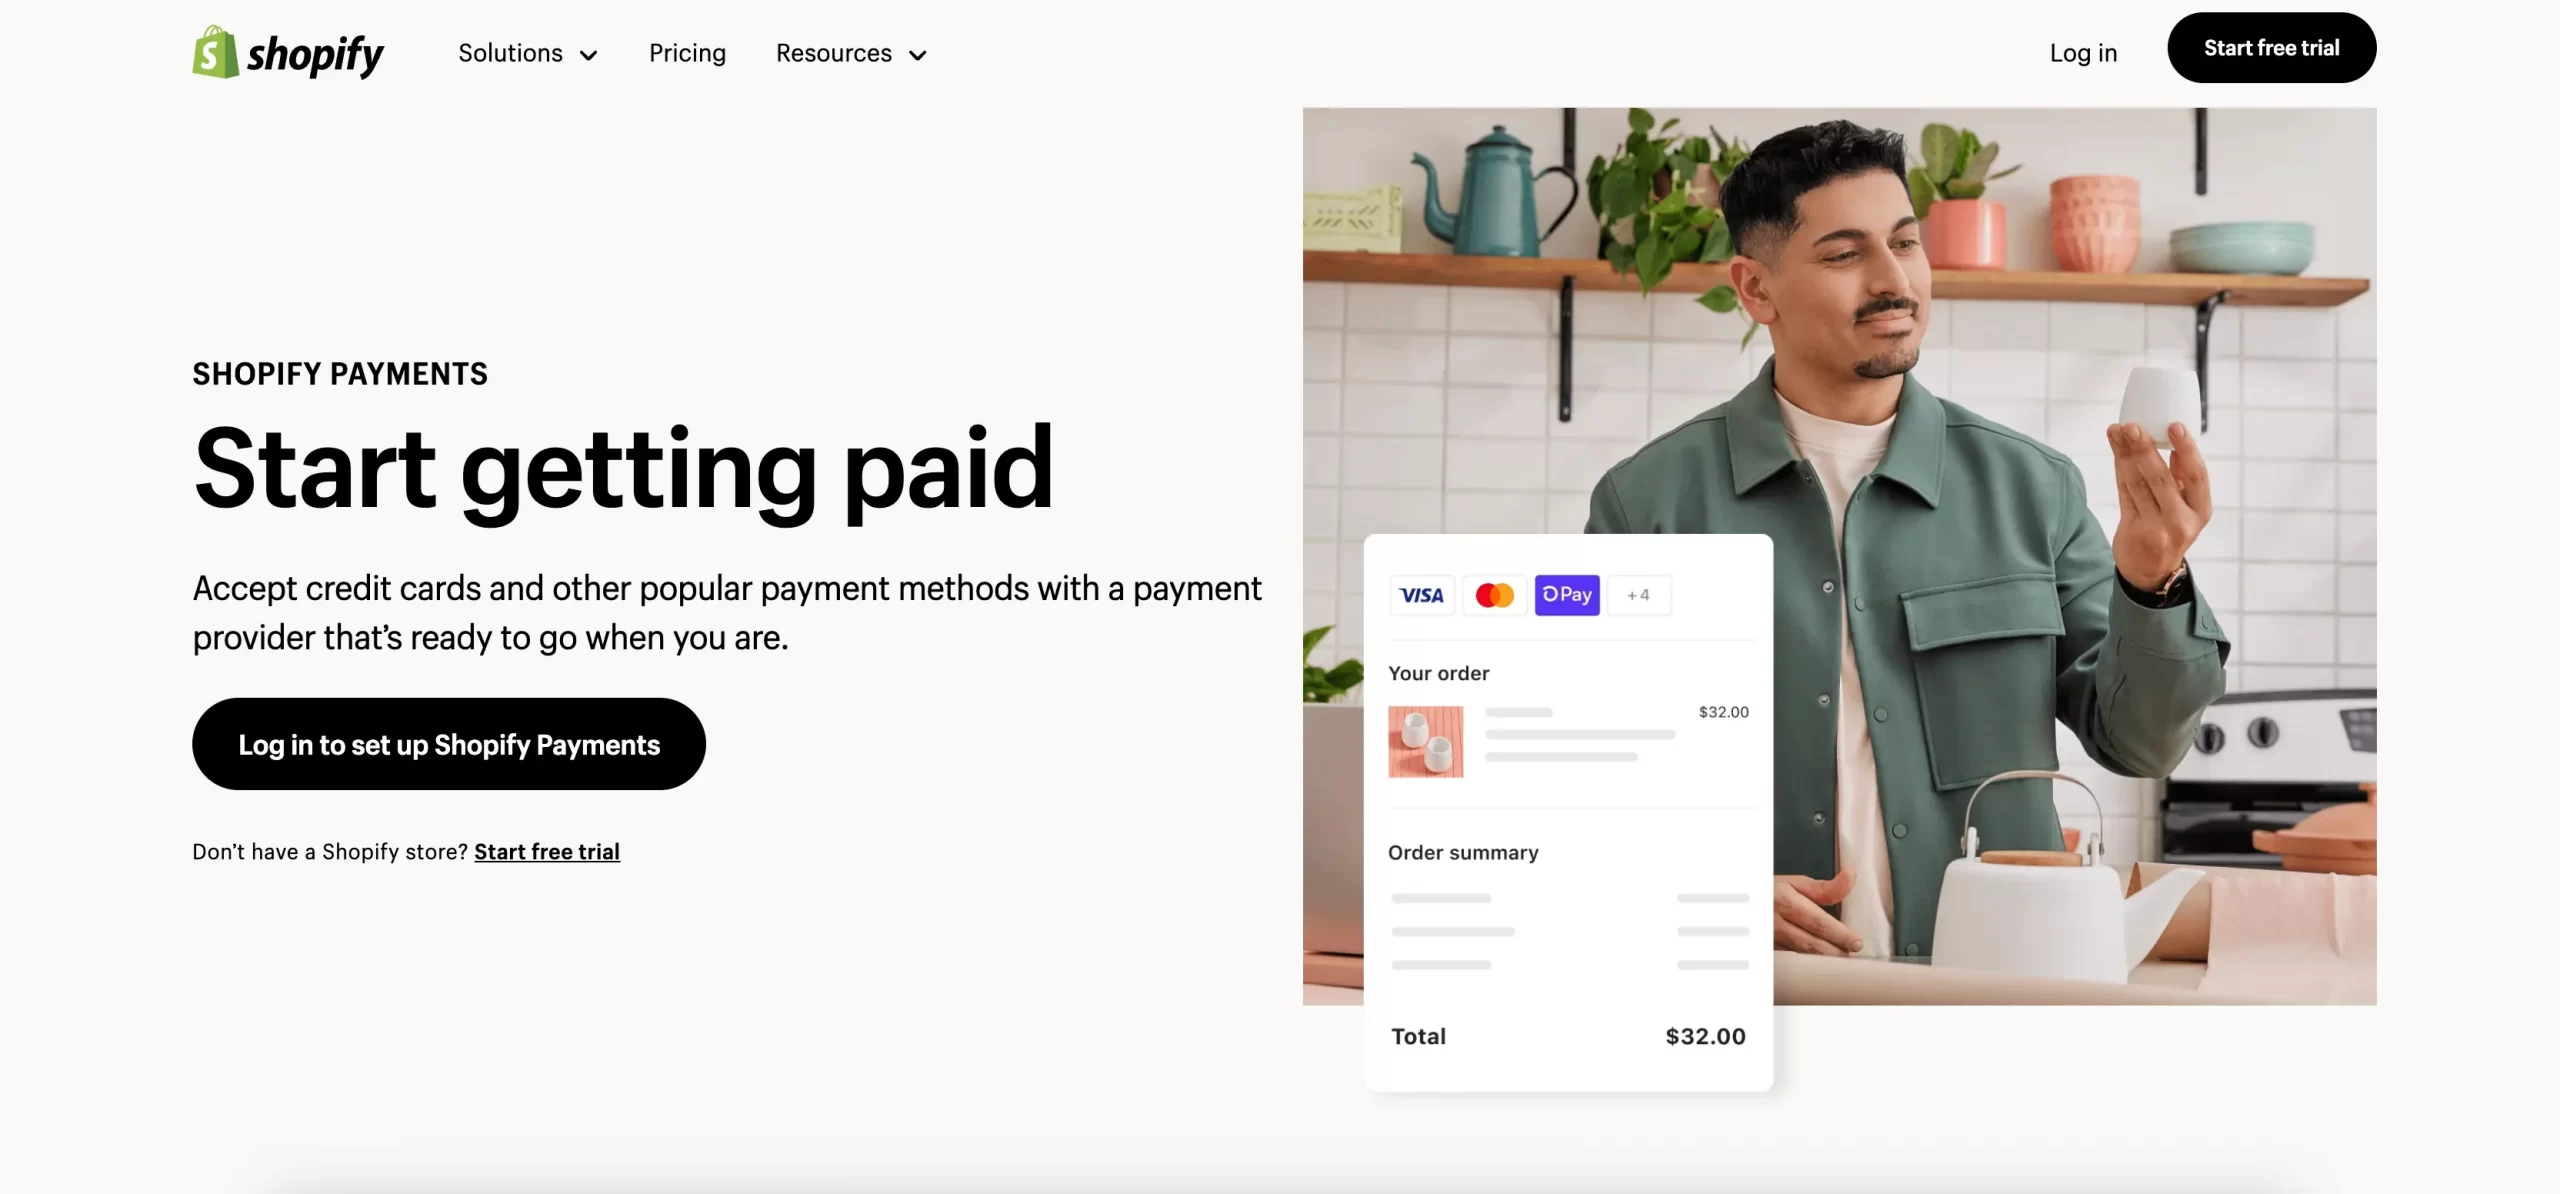 Shopify Payments by Shopify